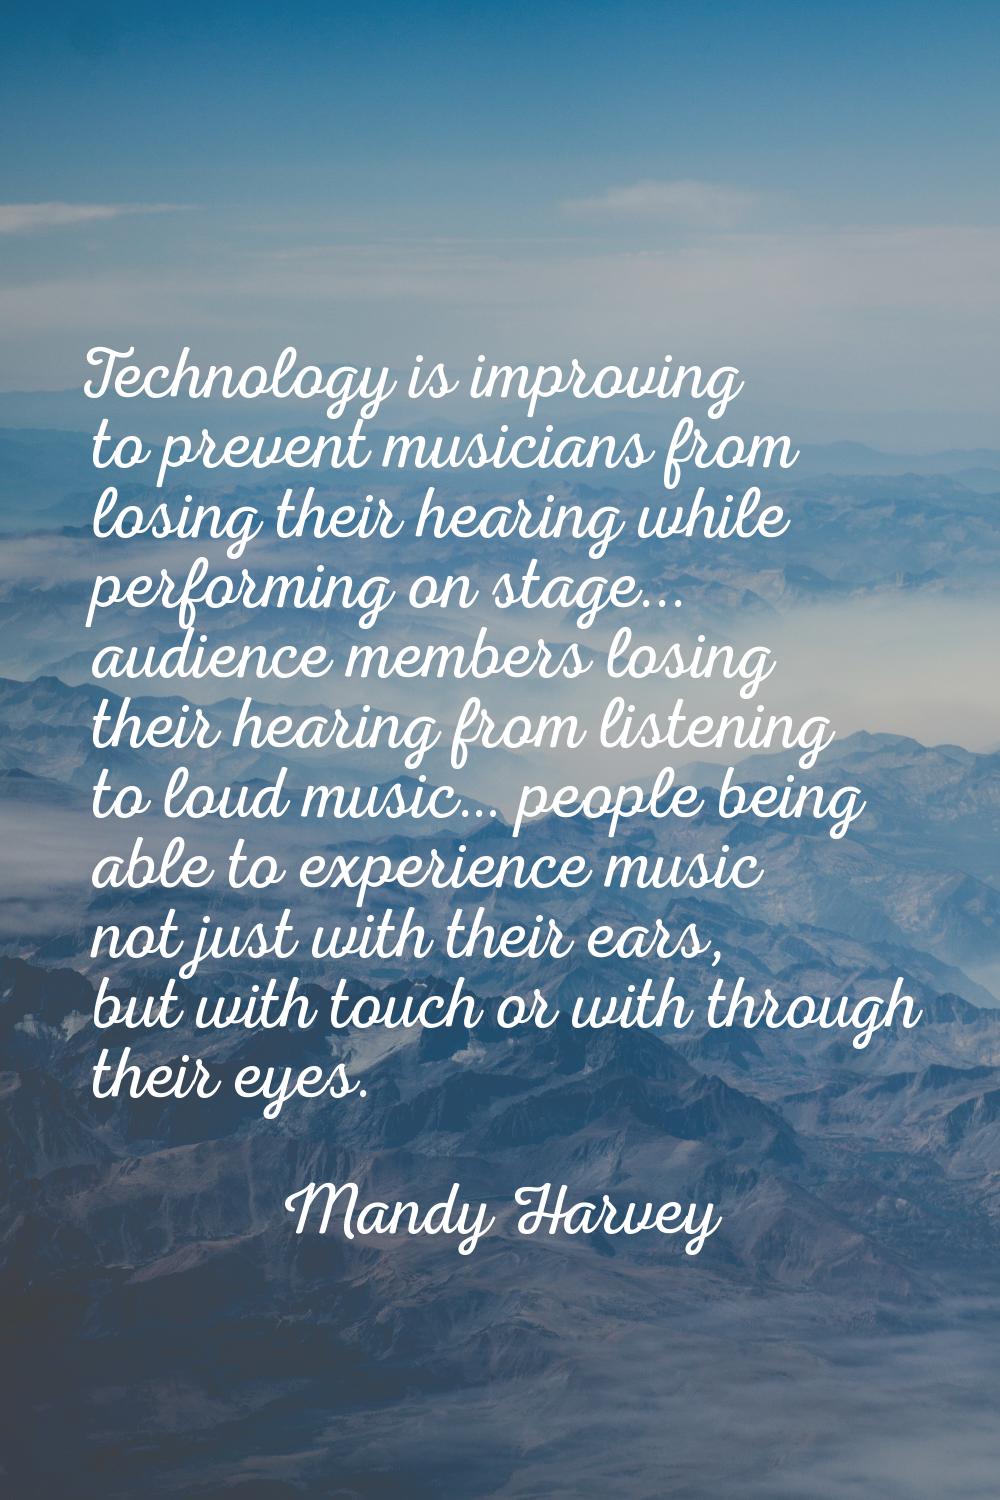 Technology is improving to prevent musicians from losing their hearing while performing on stage...